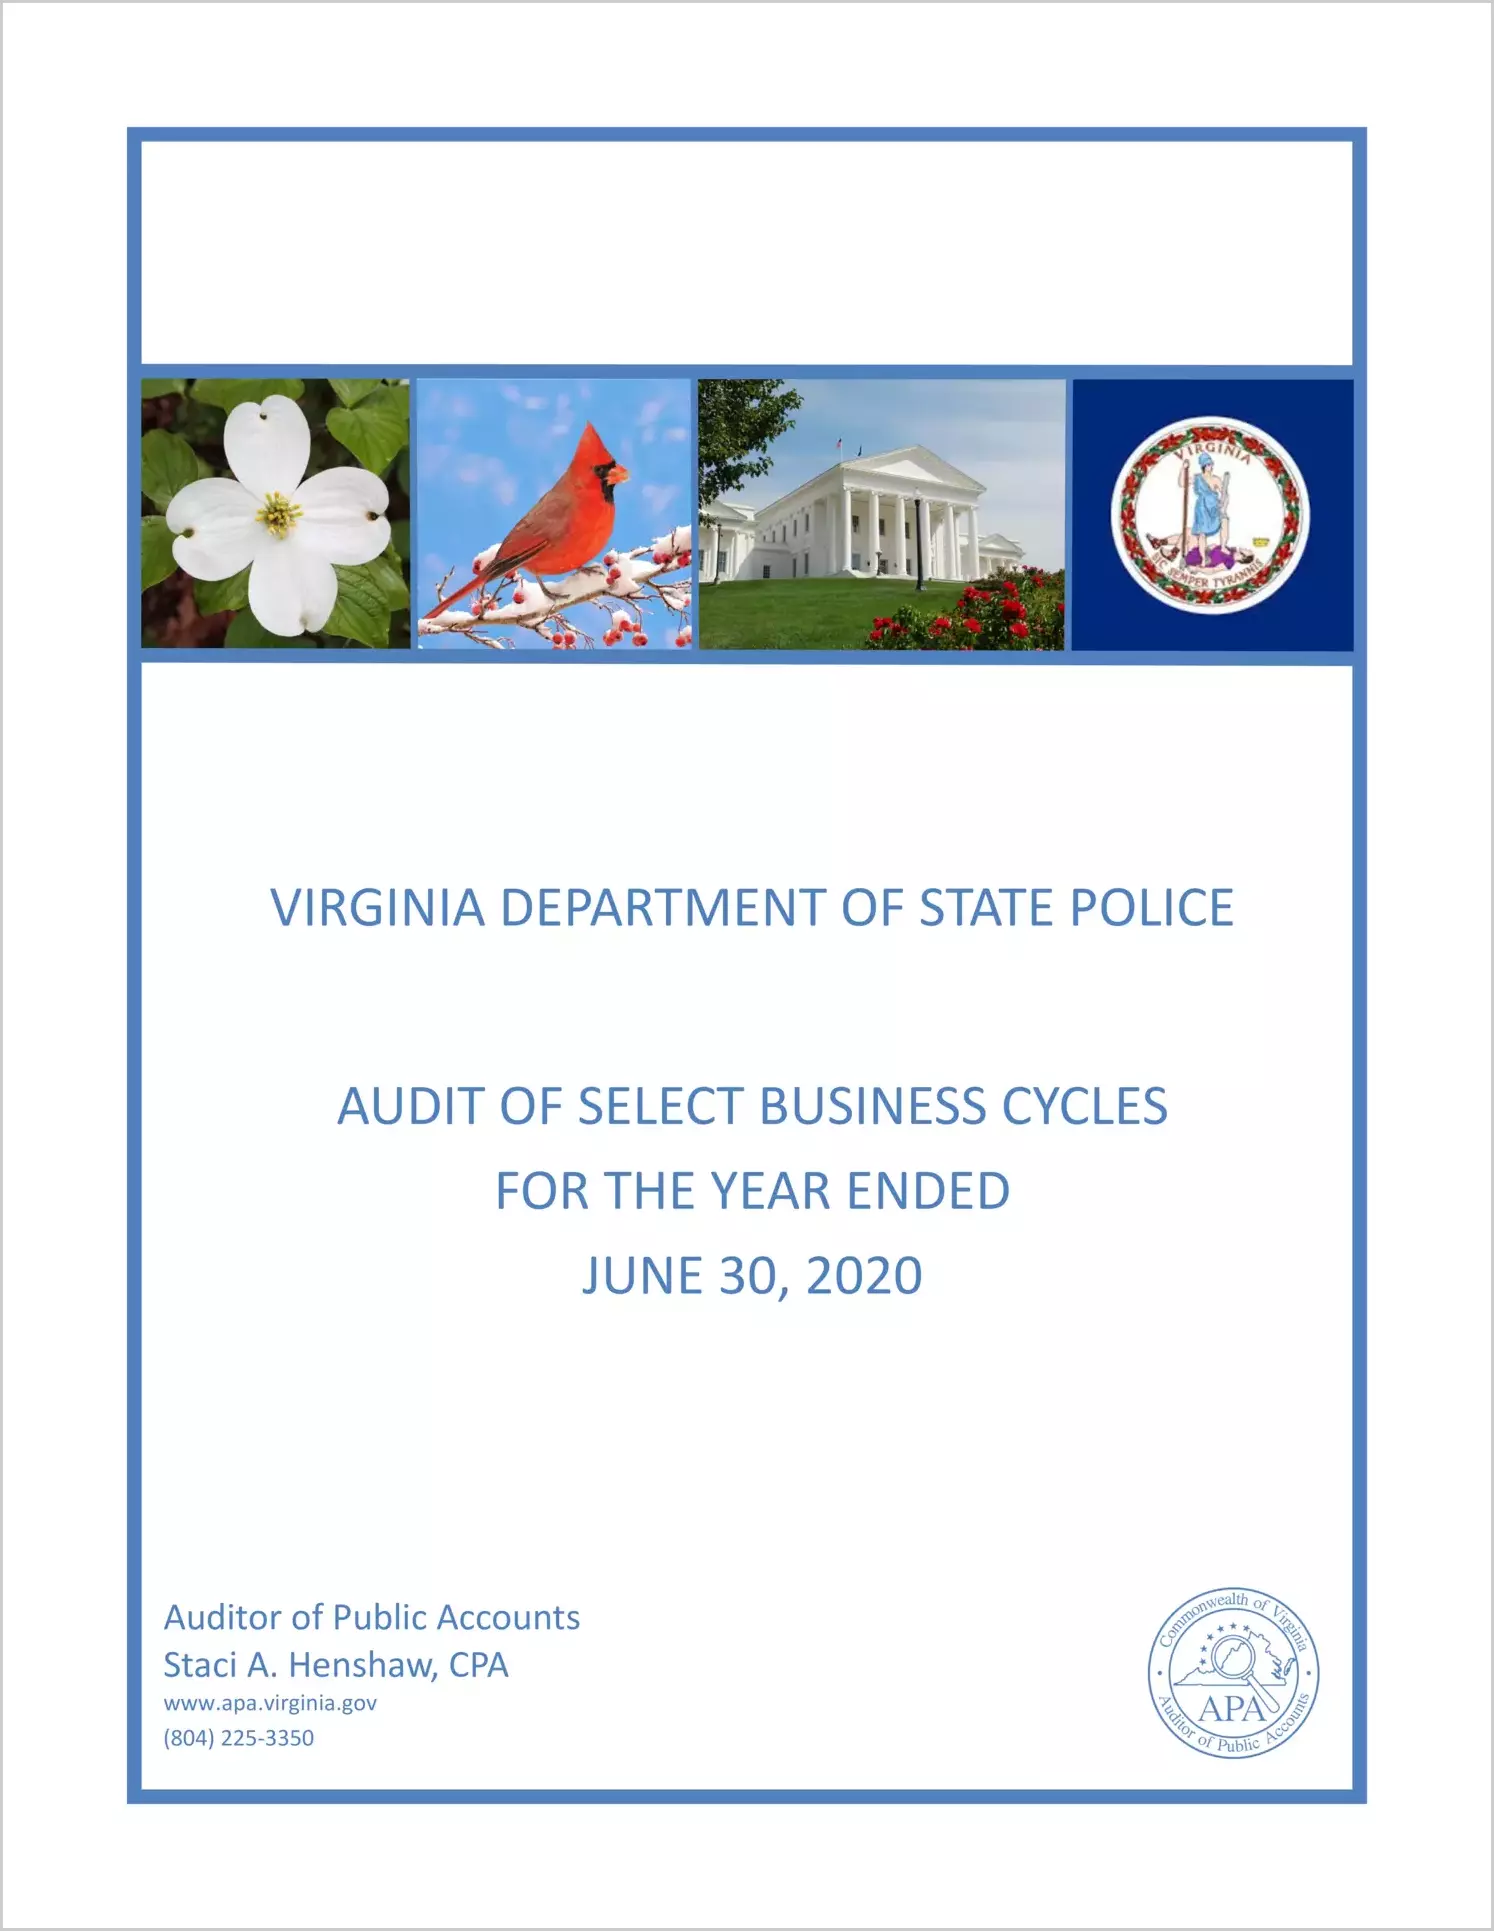 Virginia Department of State Police audit of Select Business Cycles for the year ended June 30, 2020